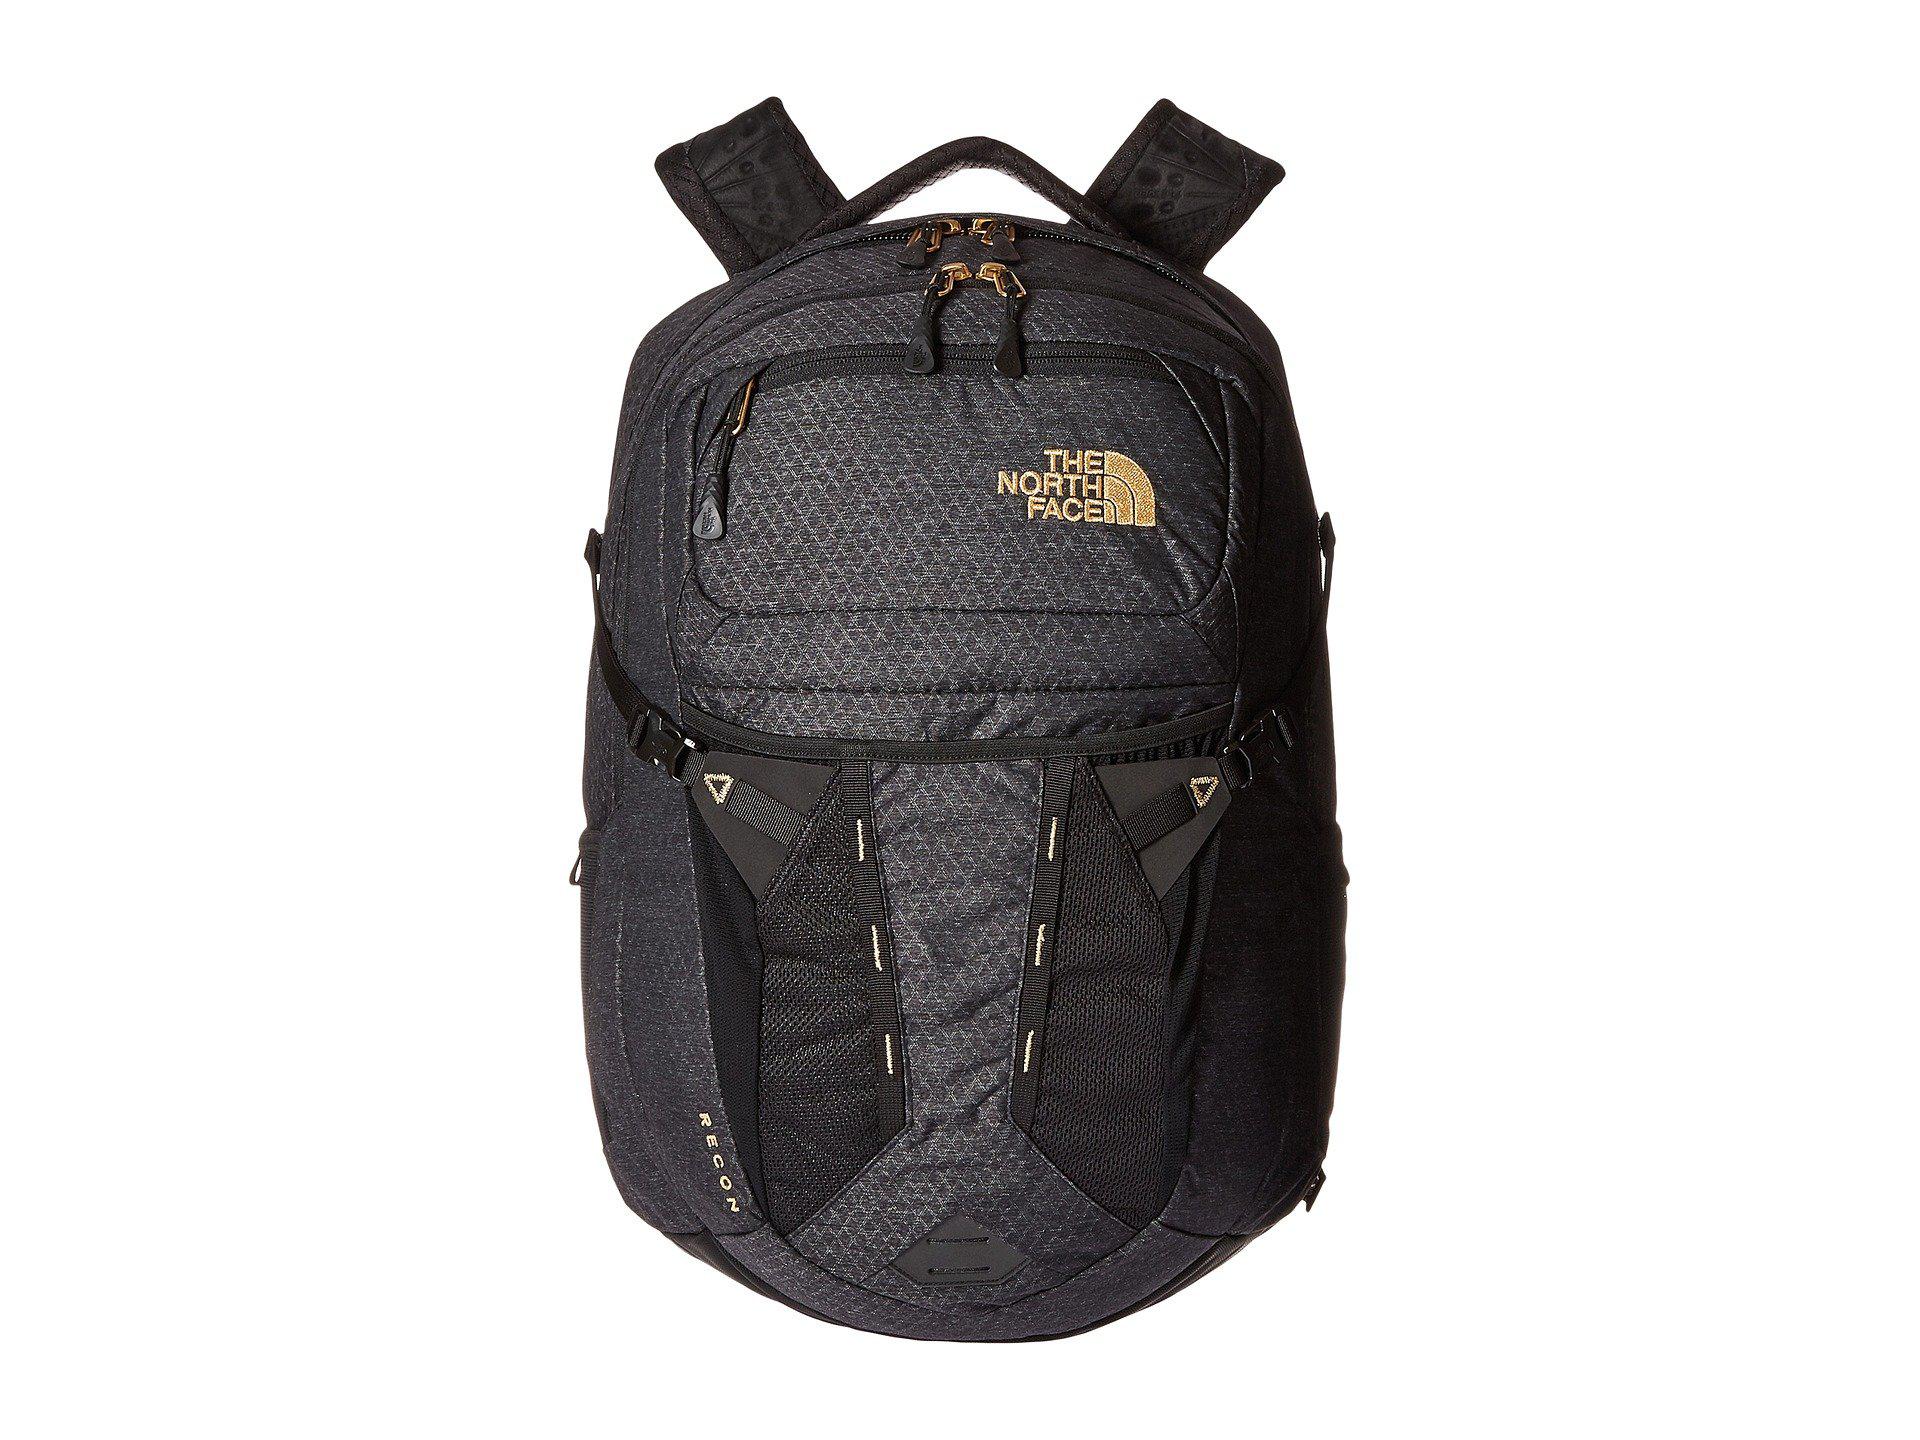 groet eiwit Viva The North Face Women's Recon (tnf Black 1) Backpack Bags | Lyst